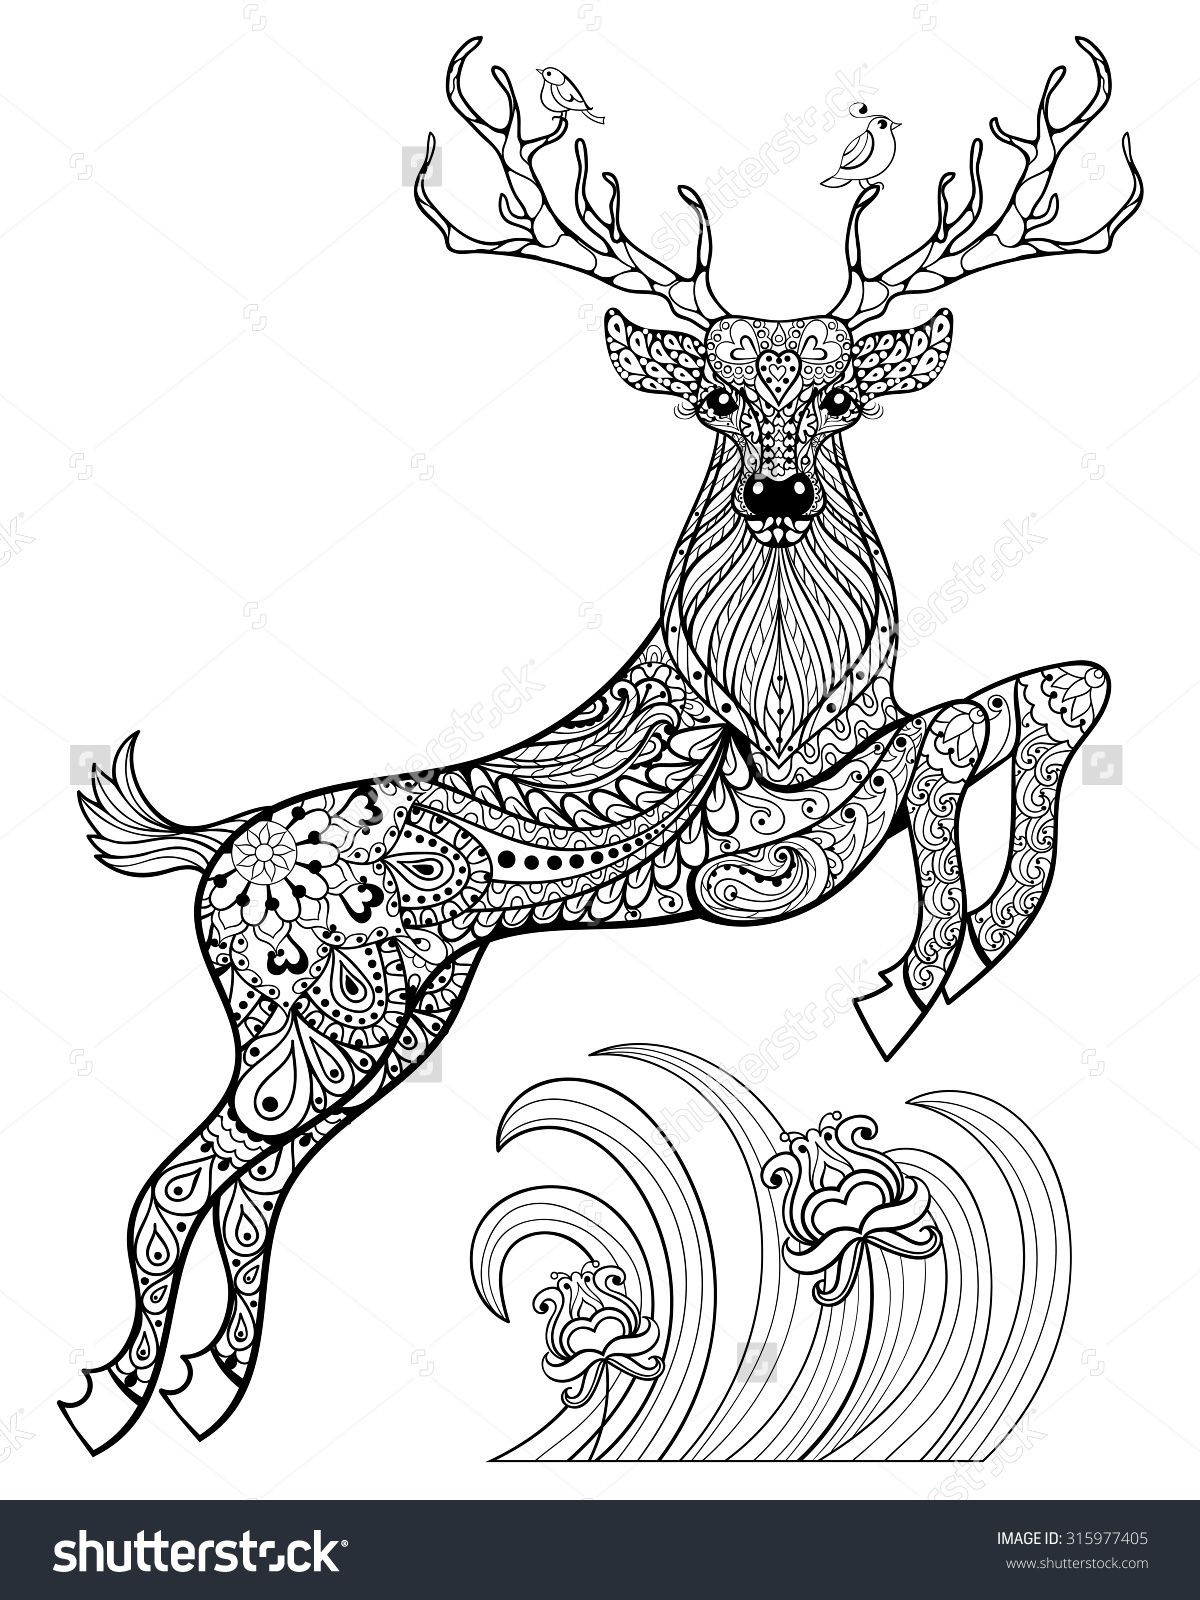 Best ideas about Deer Coloring Pages For Adults
. Save or Pin Deer Coloring Pages for Adults Now.